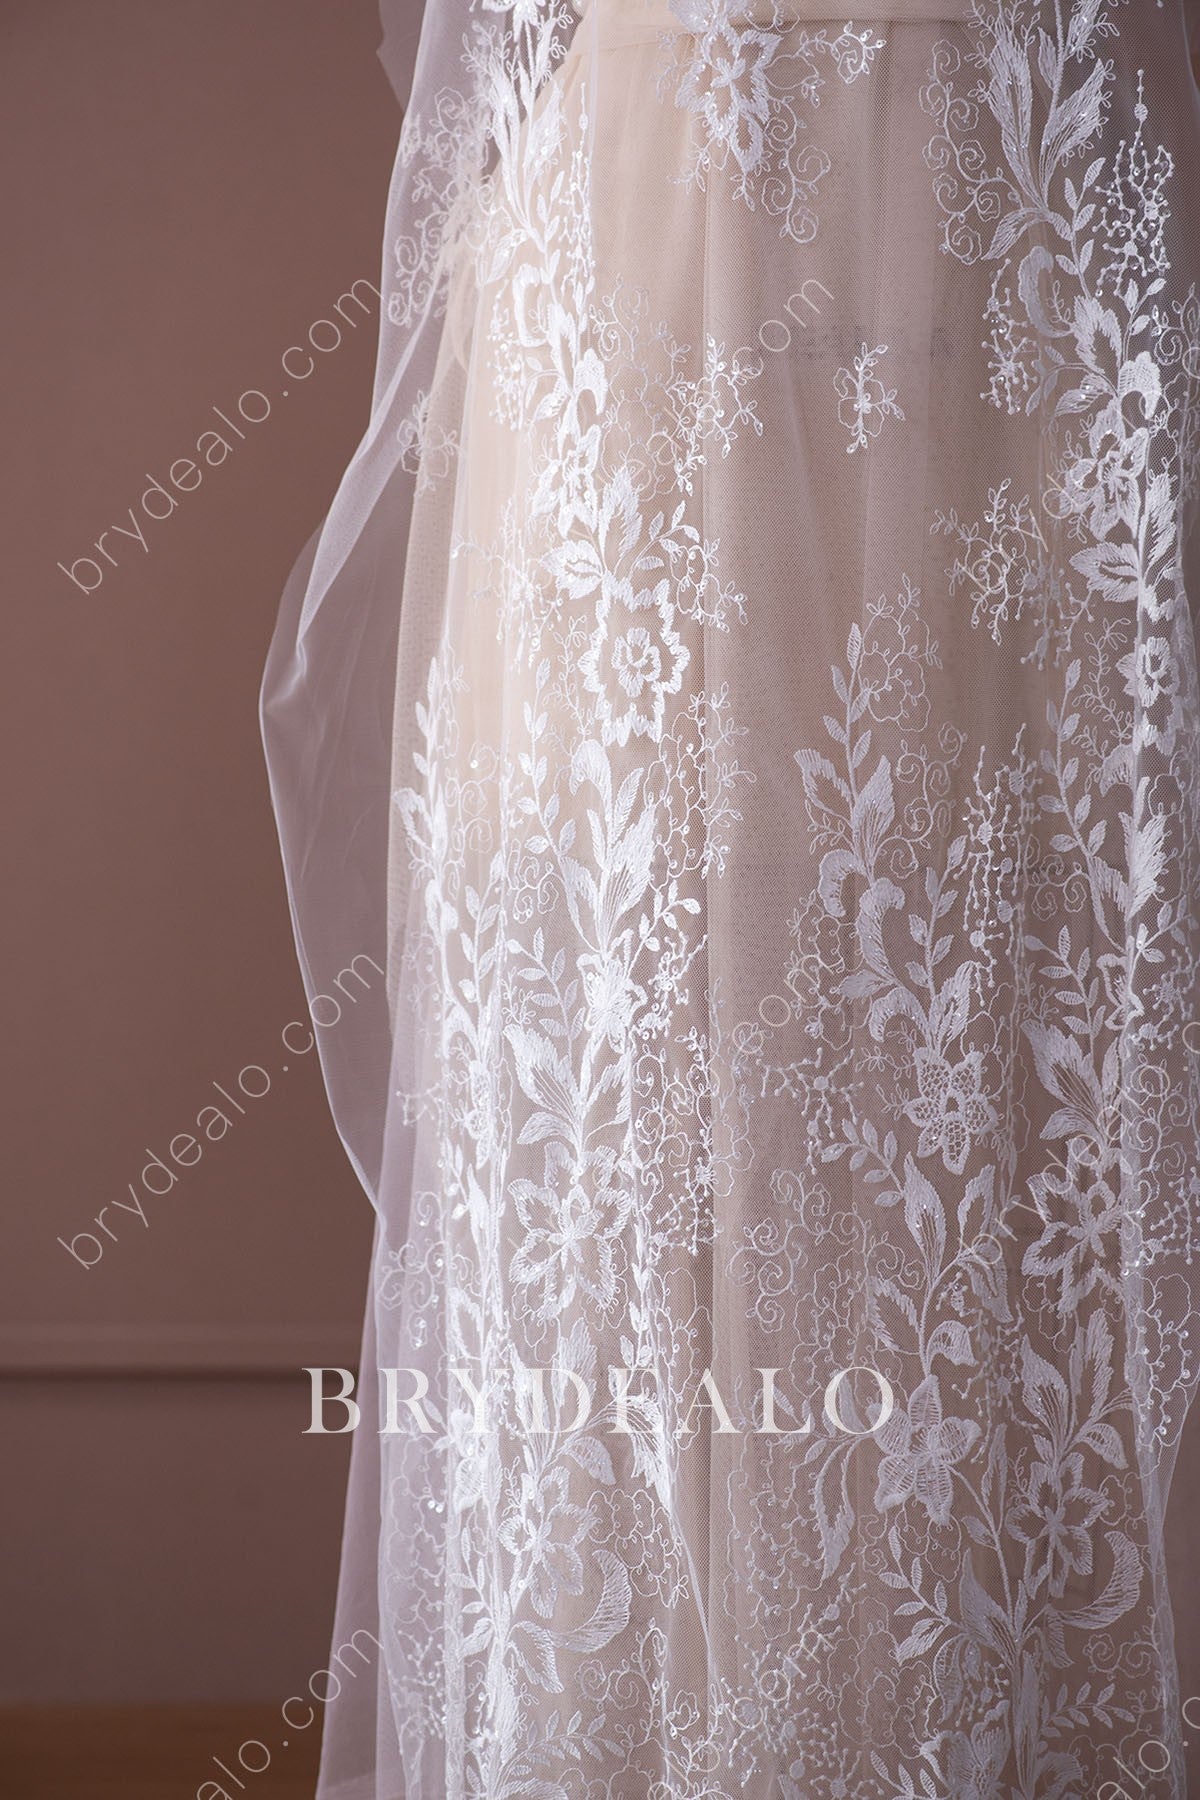 Exquisite Sequined Floral Leafy Lace 